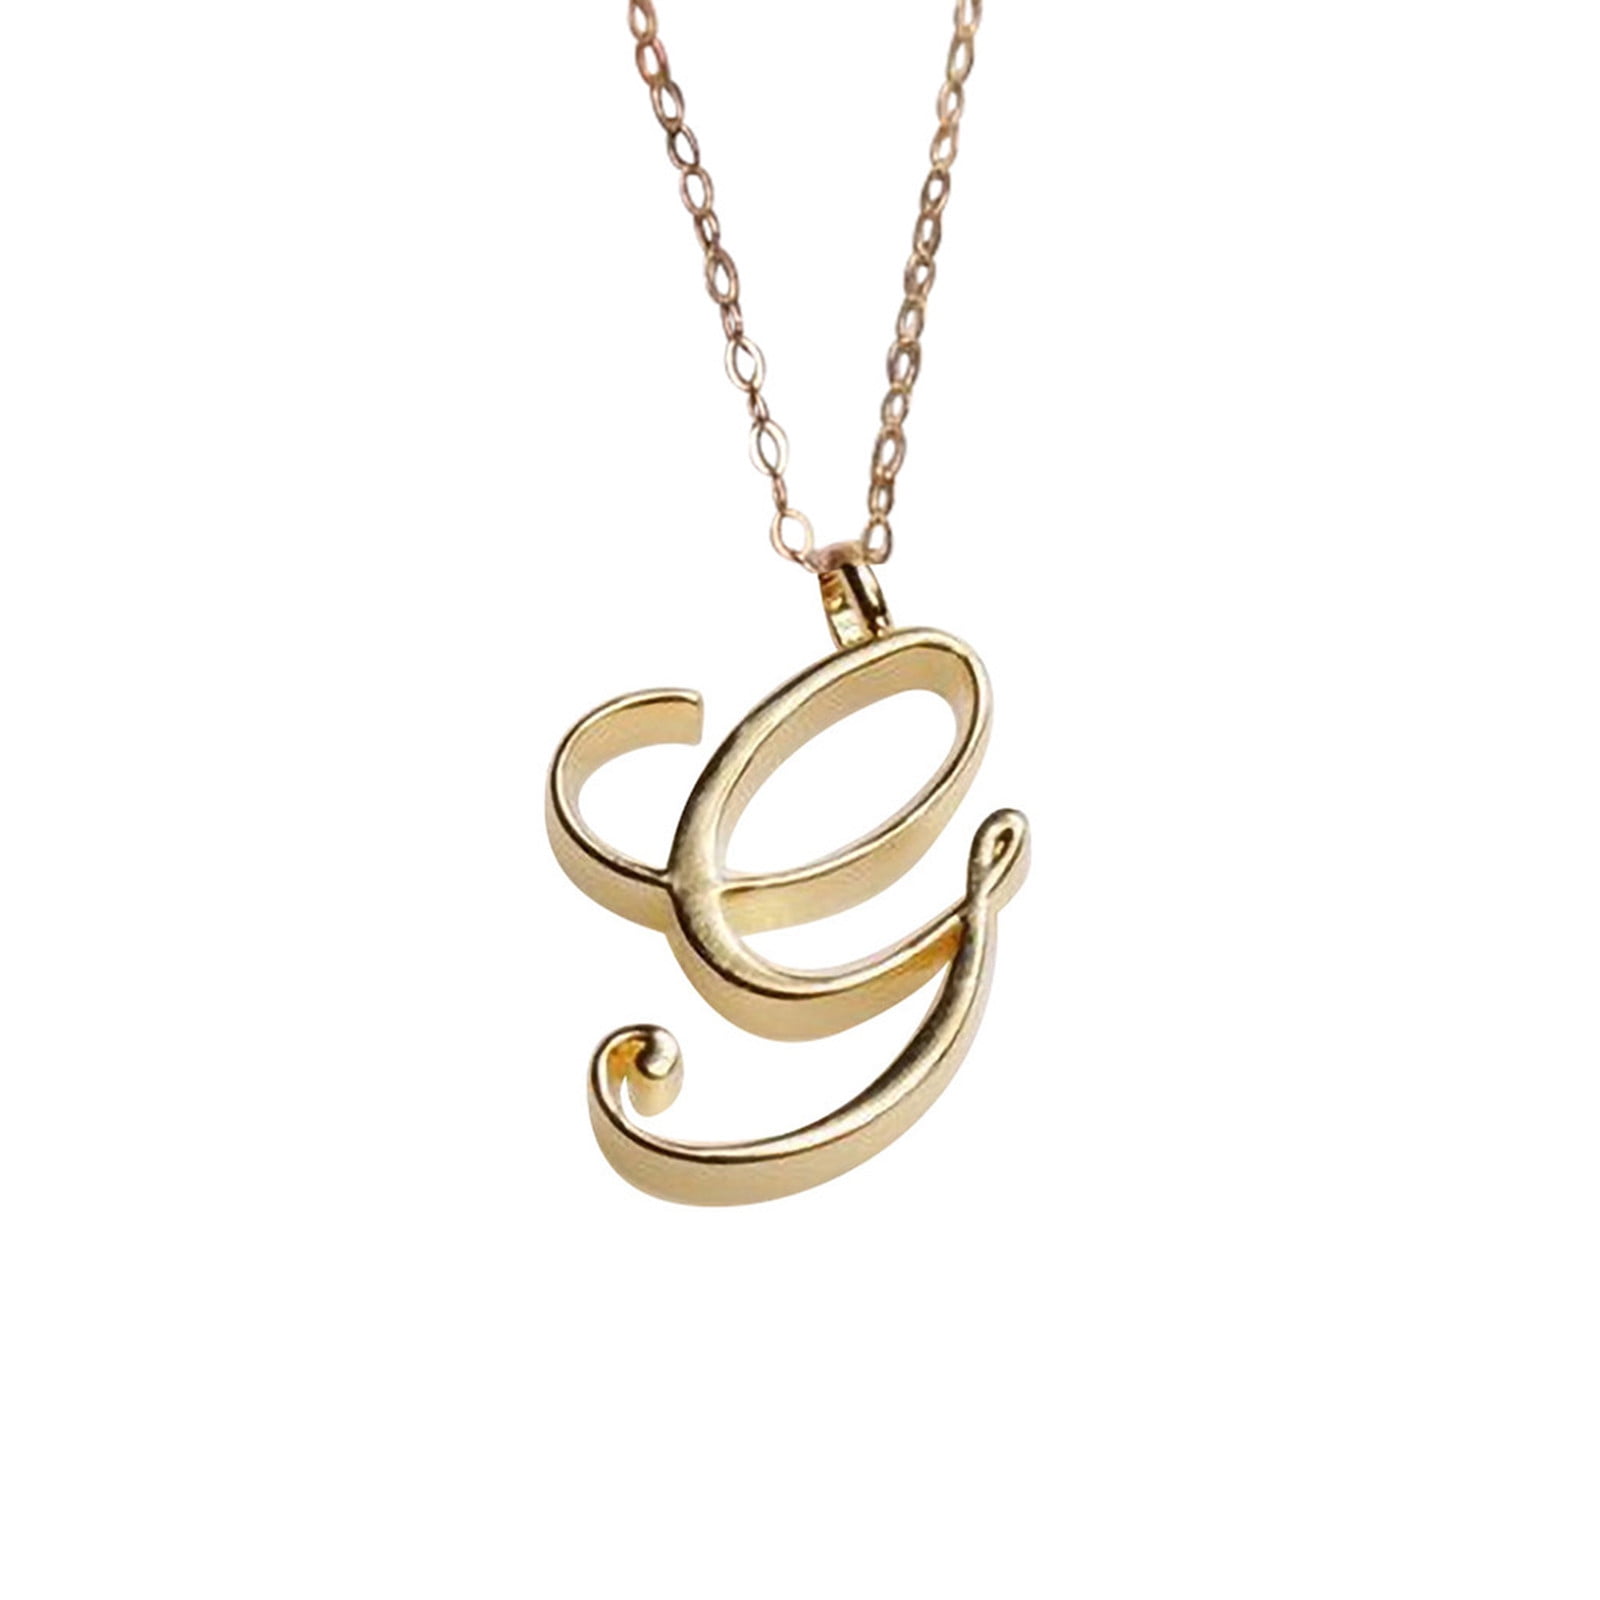 Yubnlvae Necklaces & Pendants Heart Fashion Women's Letter Letters Necklace  Chain 26 Circular Double Layer Neck N 